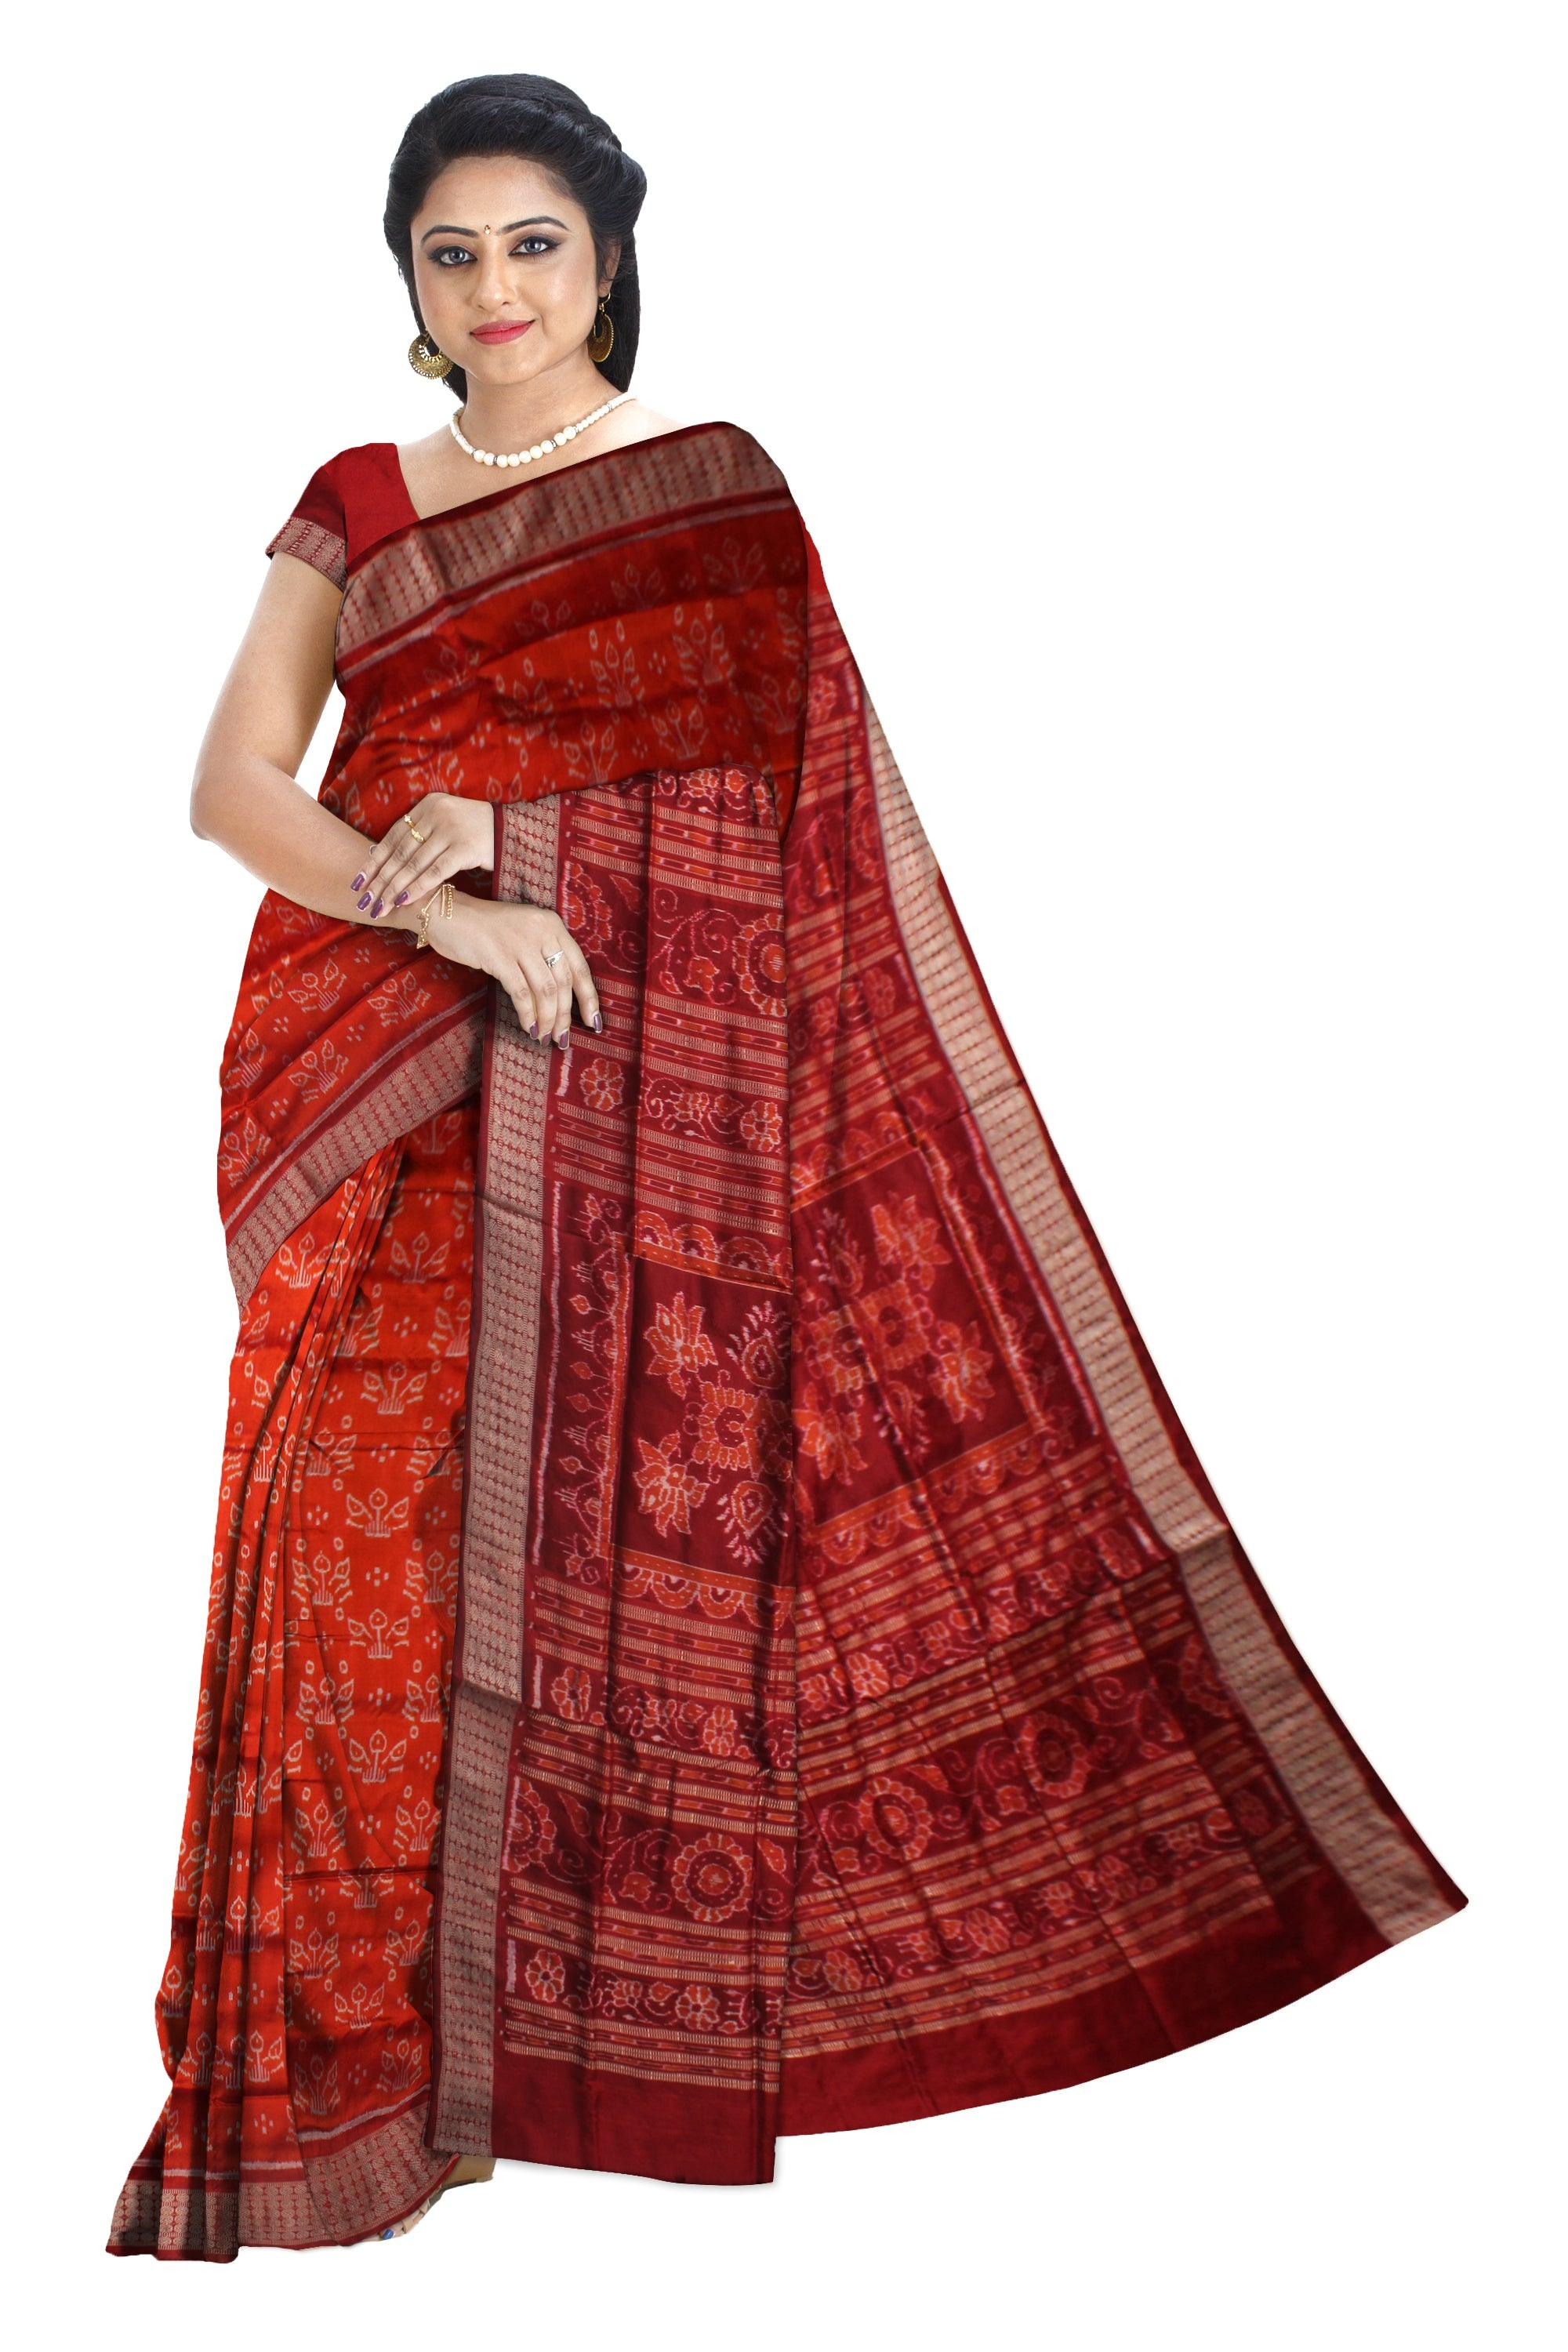 MARRIAGE COLLECTION PURE SILK SAREE IN ORANGE AND MAROON COLOR BASE, COMES WITH BLOUSE PIECE. - Koshali Arts & Crafts Enterprise